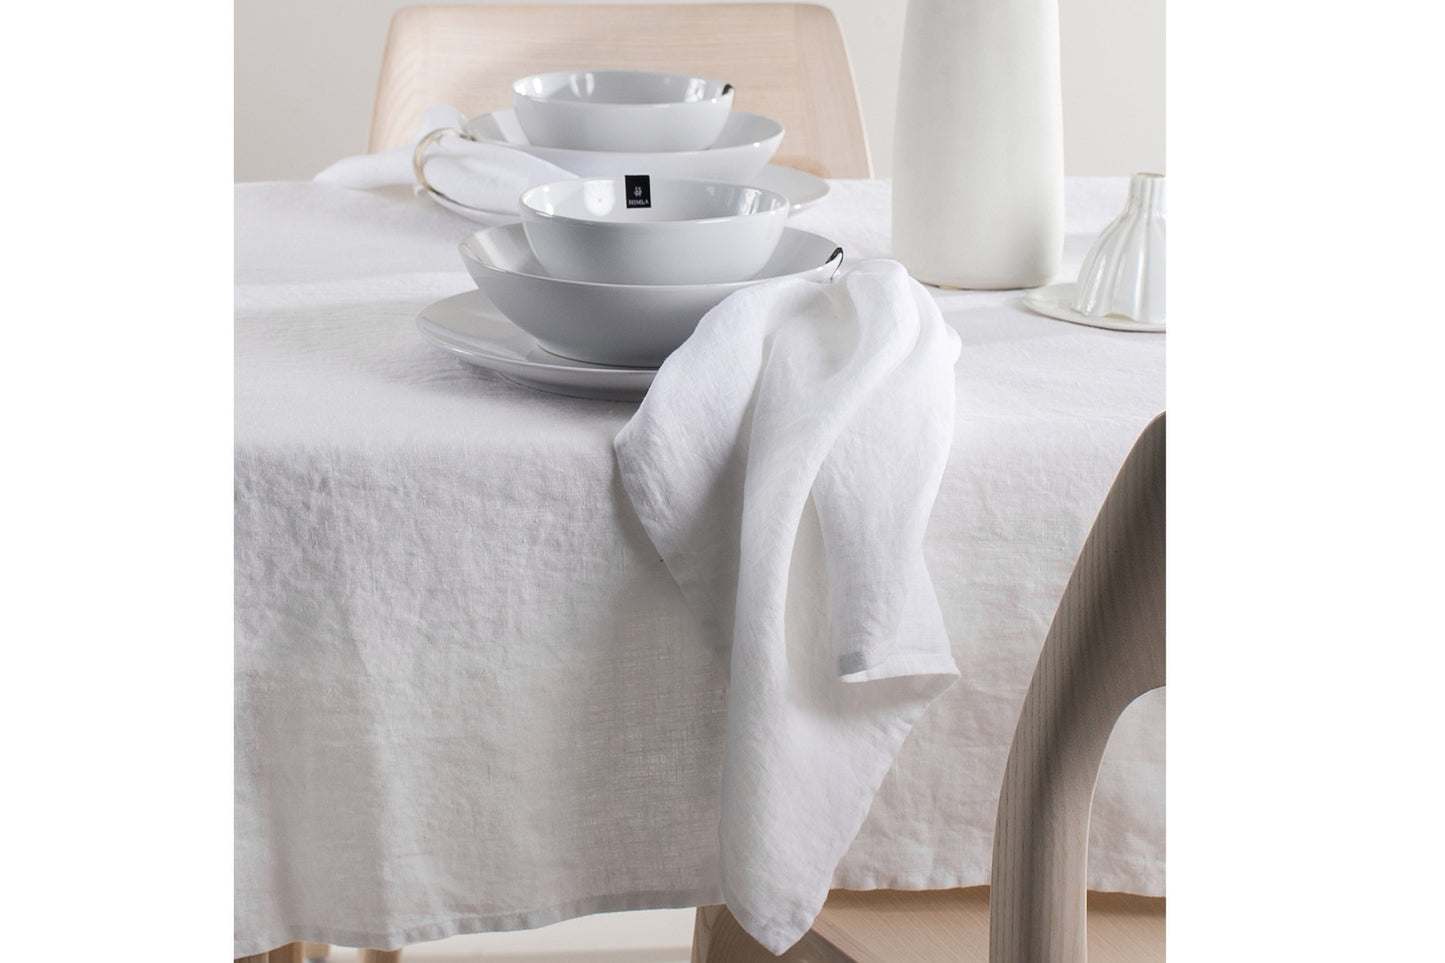 Sunshine, prewashed linen in casual look, tablecloth, white